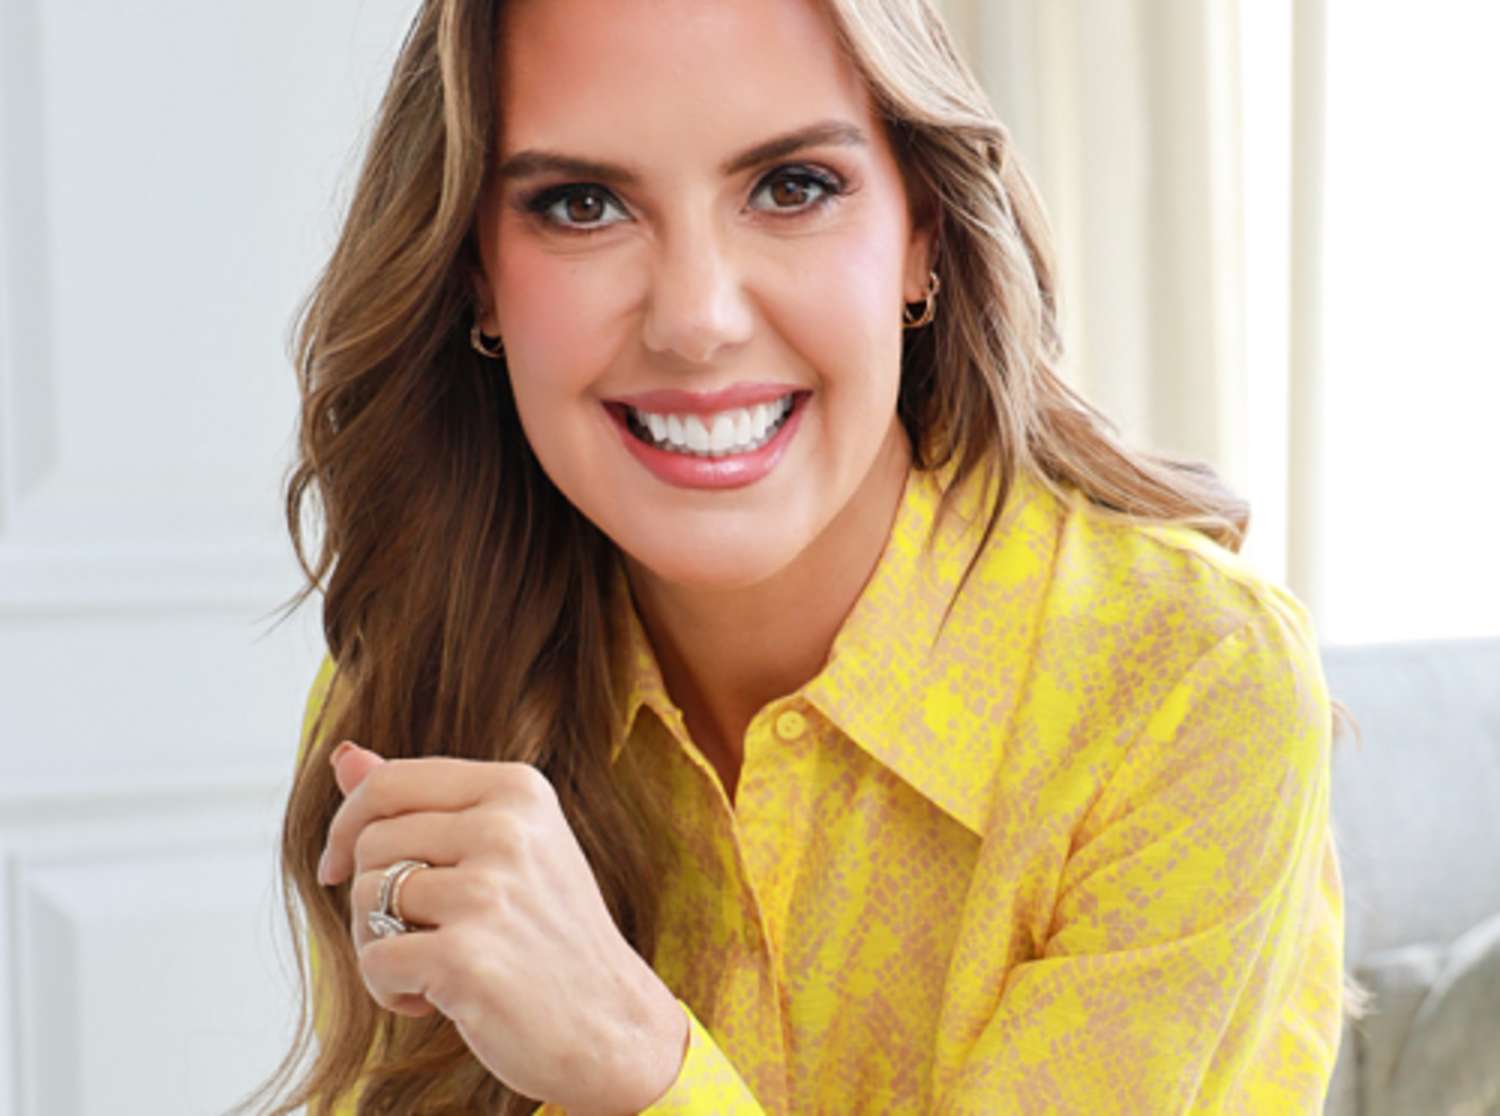 About Kendra Scott Known for her dynamic use of color and genuine materials, Kendra Scott's commitment to innovation, quality, and detail has taken her small start-up to a billion-dollar business - giving back over $65M along the way. Learn More.